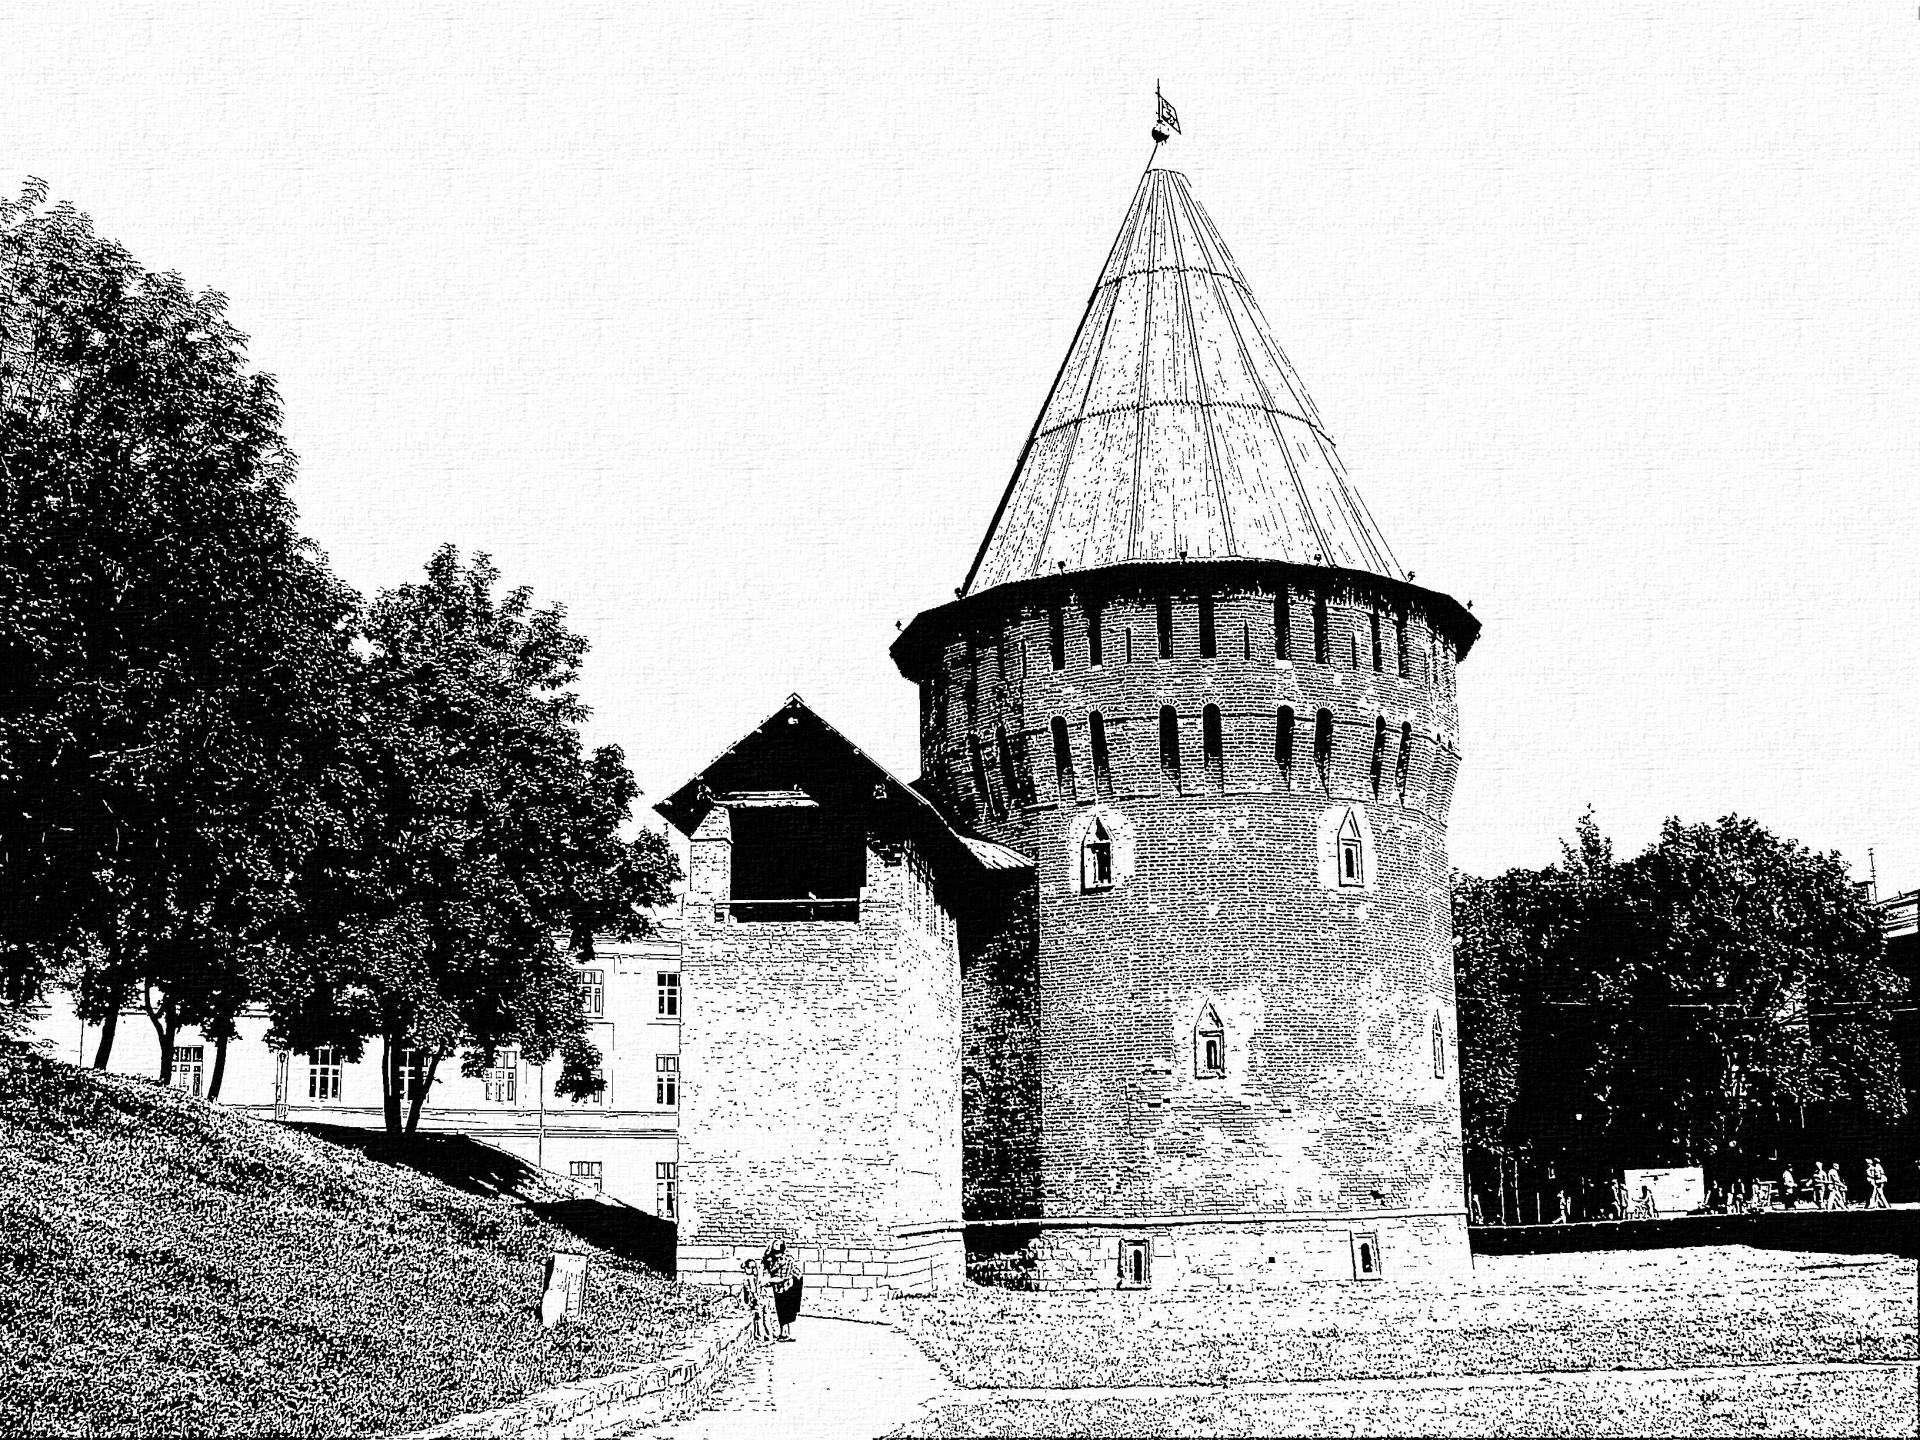 Black and white drawing of the Thunder tower in Smolensk, made in the style of engraving.